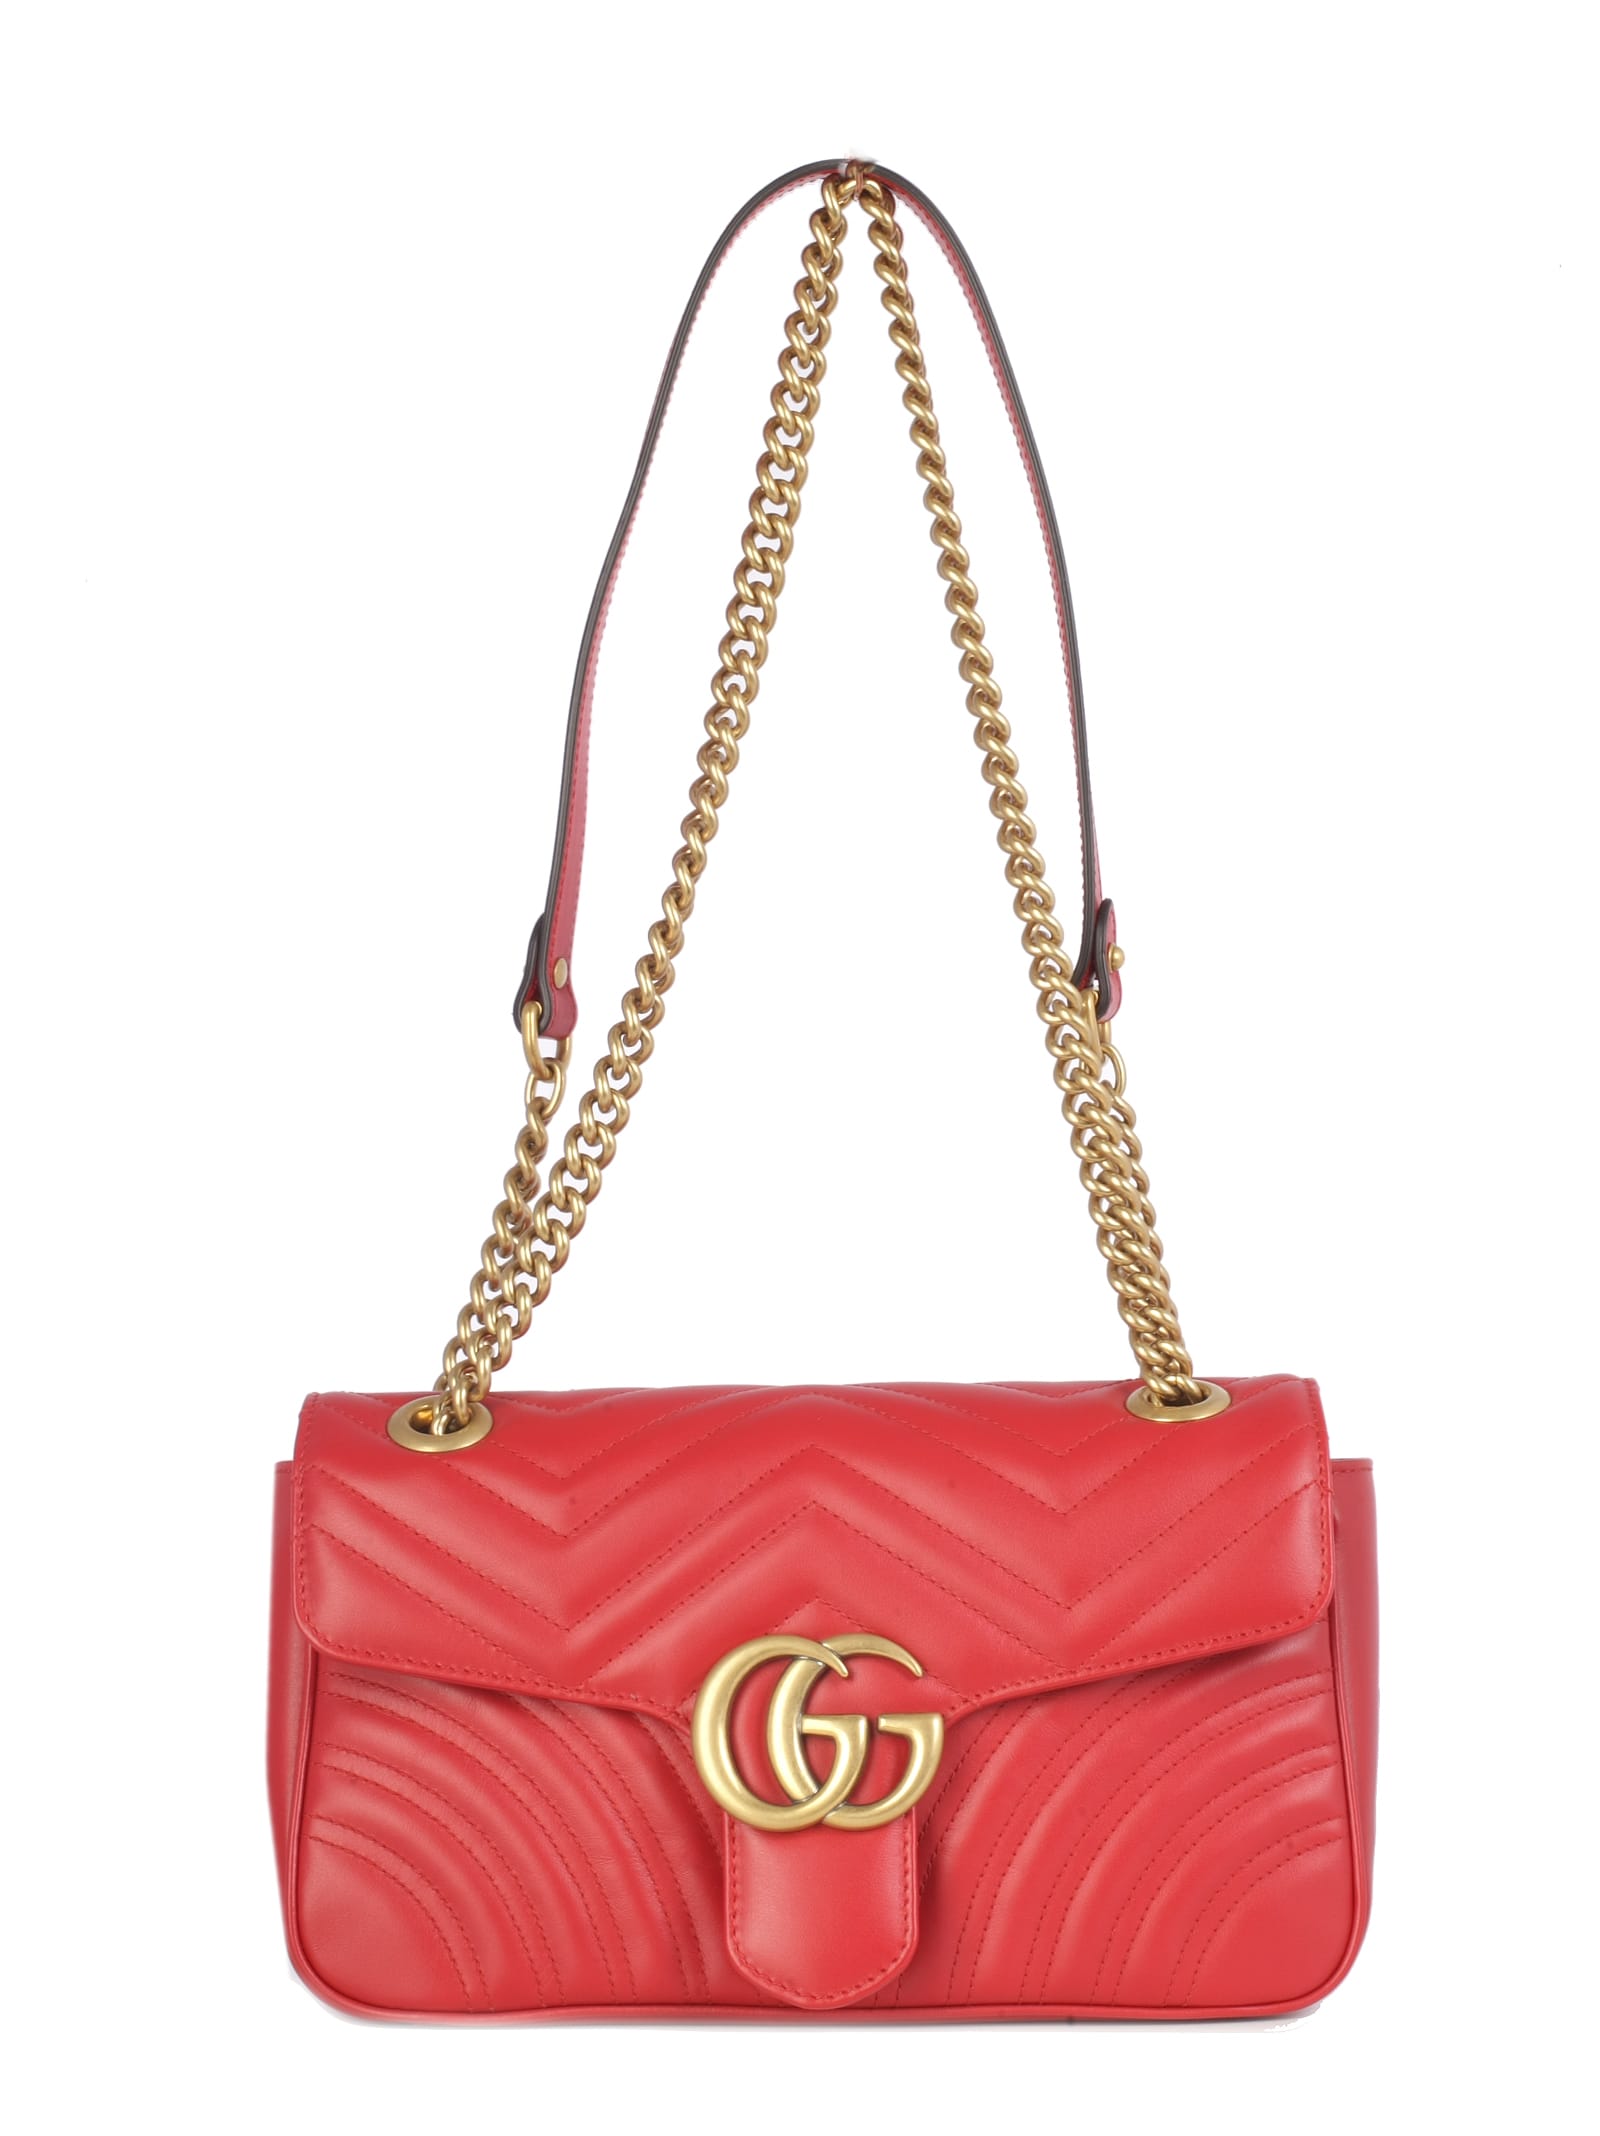 Gucci Gucci Gg Marmont S Whit Flap, Brass Logo Gg On The Flap Chain And ...